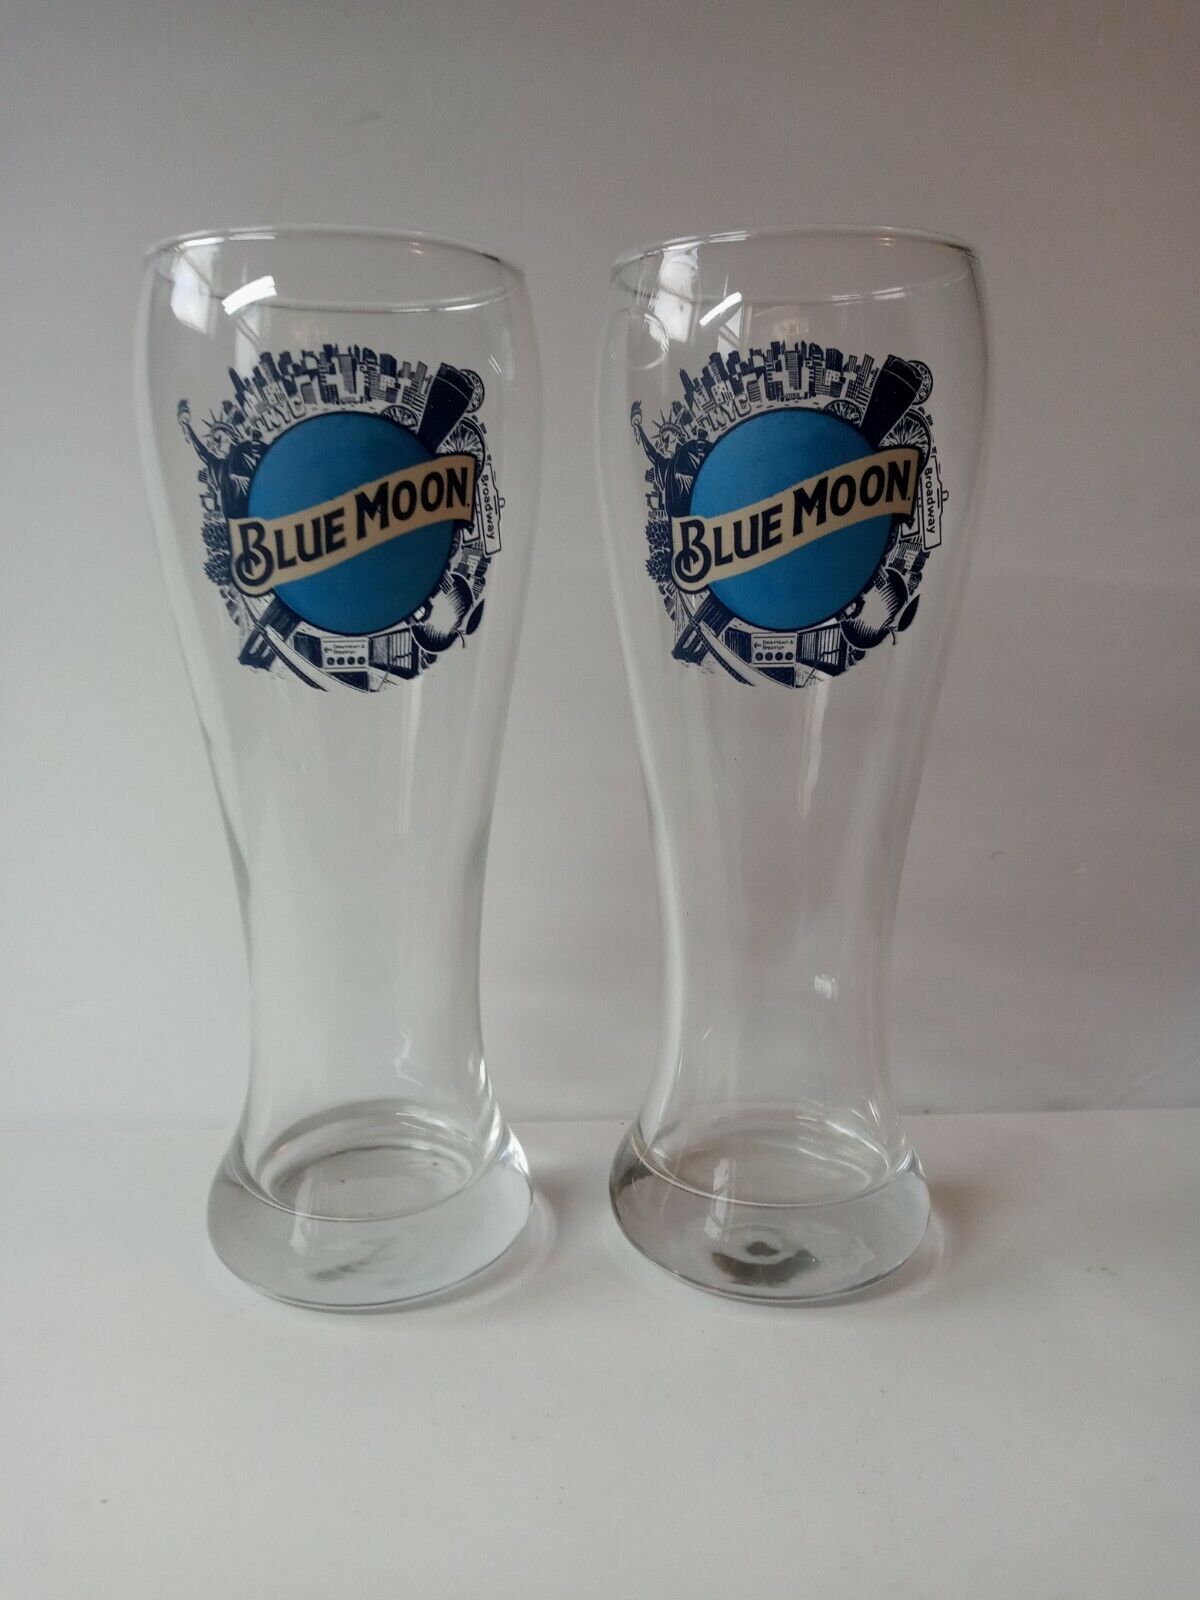 Blue Moon NYC 16 oz Pilsner Beer Glass - Set of Two (2) Glasses NY Edition New Blue Moon - фотография #6